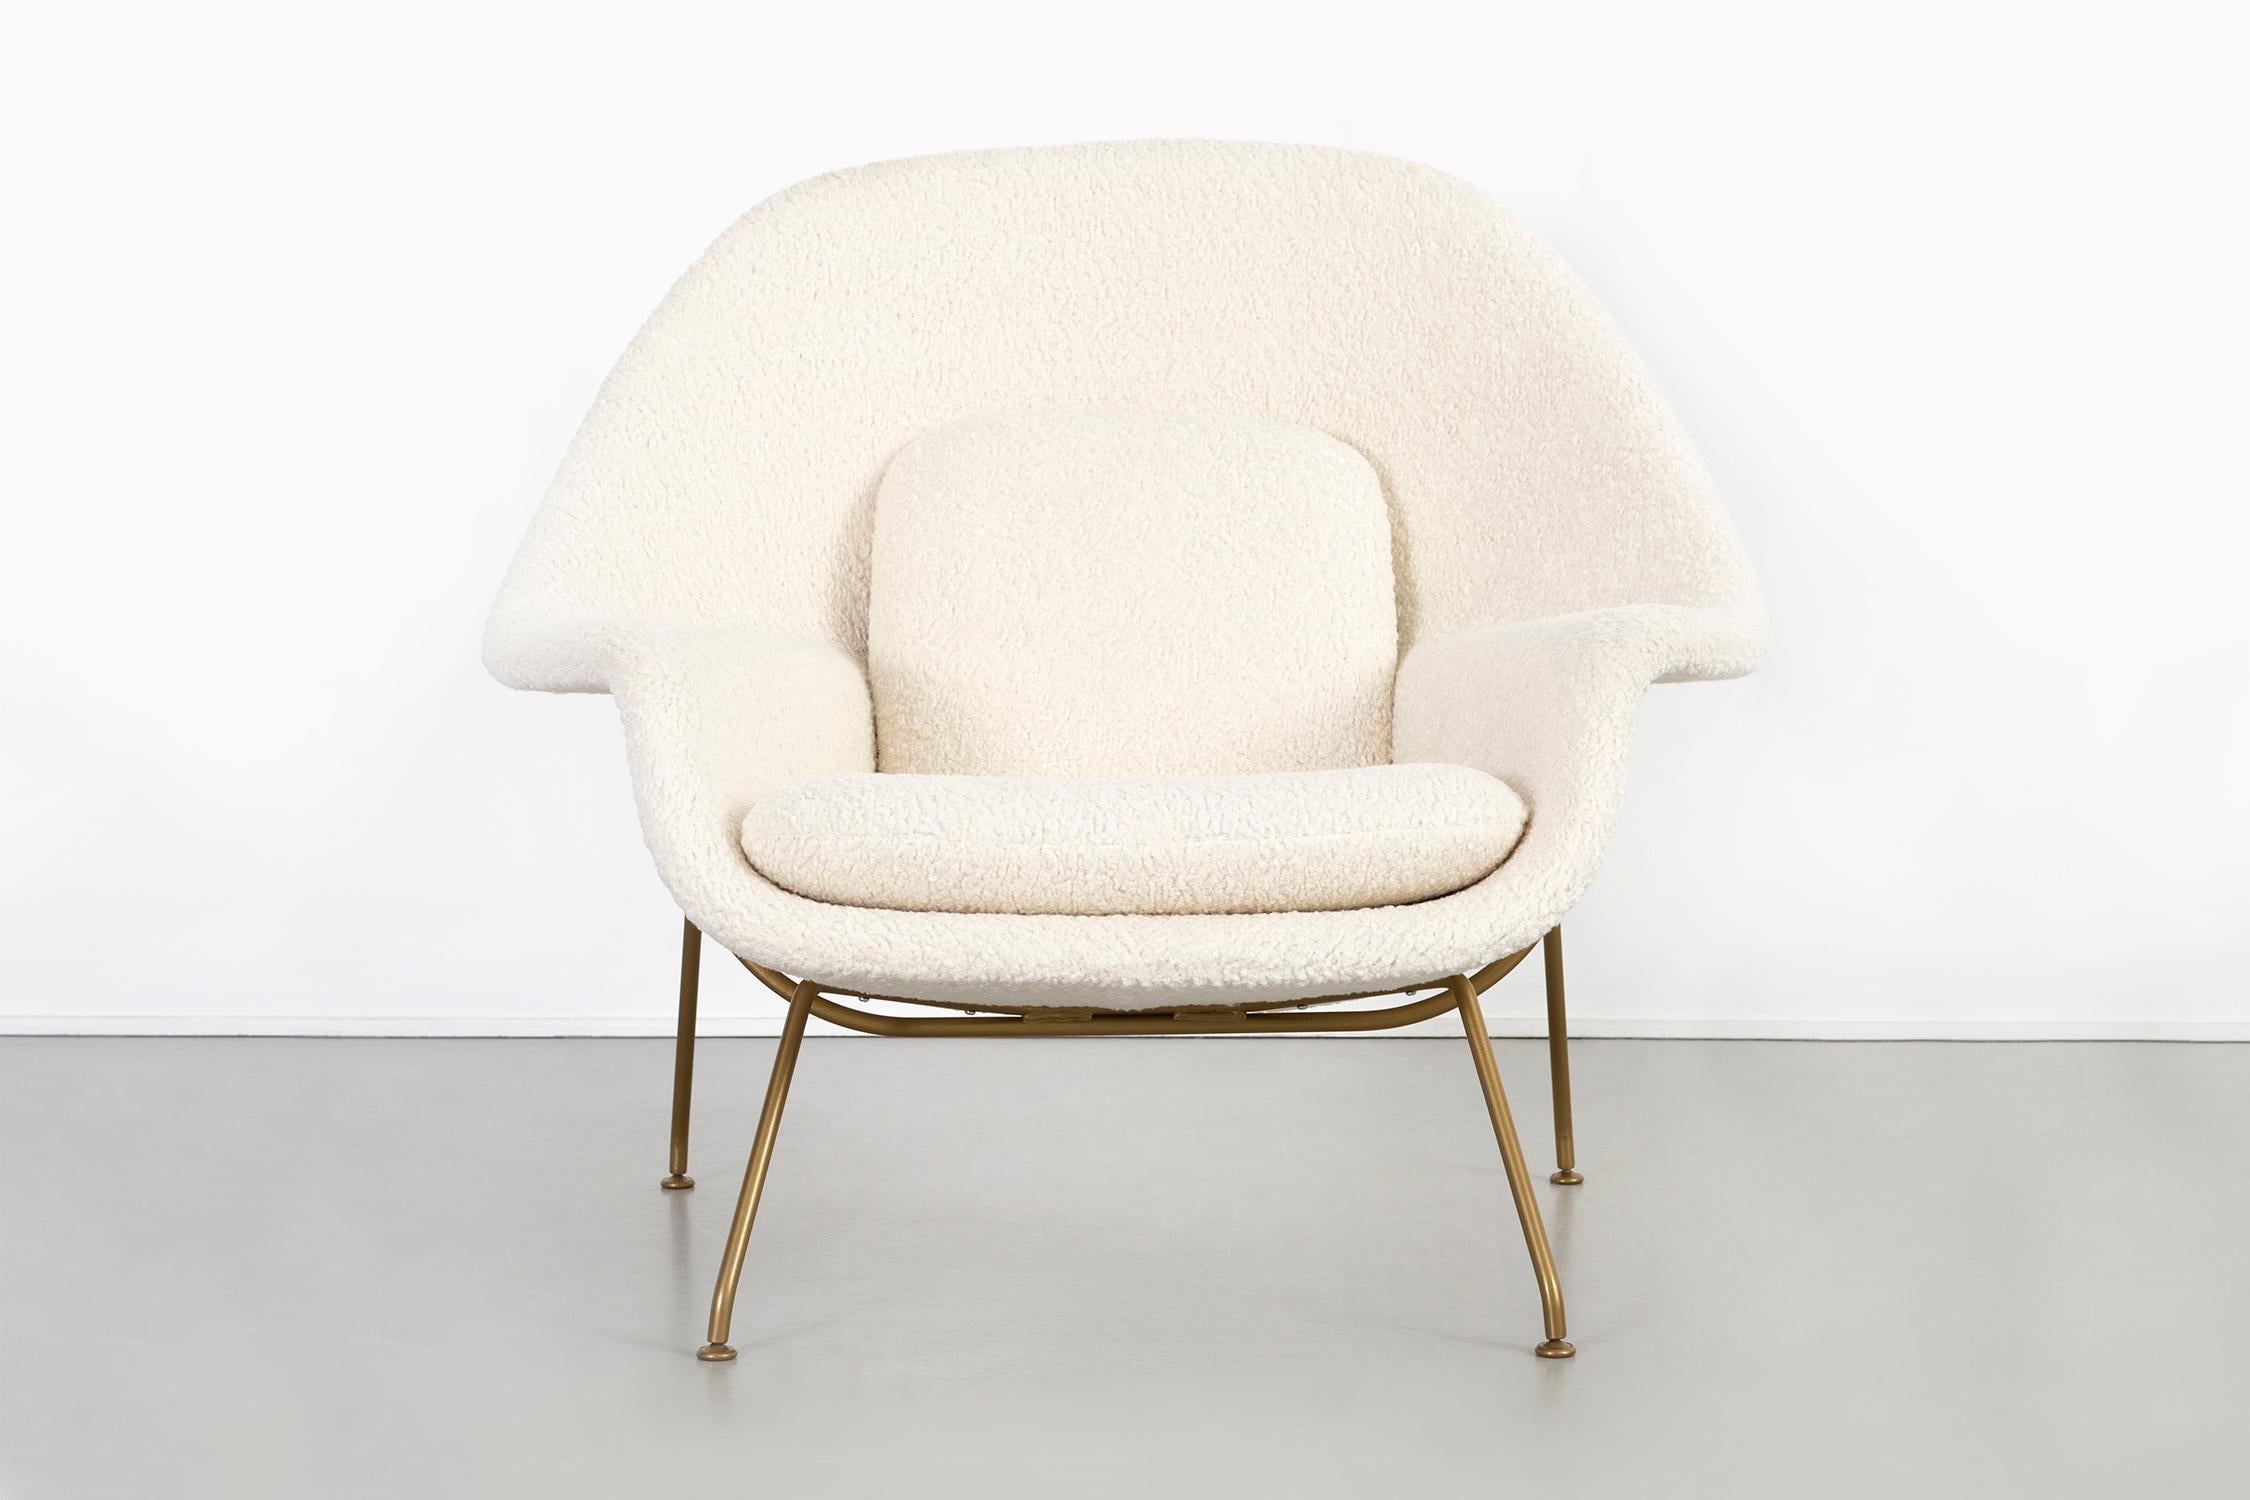 American Set of Saarinen for Knoll Mid-Century Modern Womb Chairs with Brass Bases